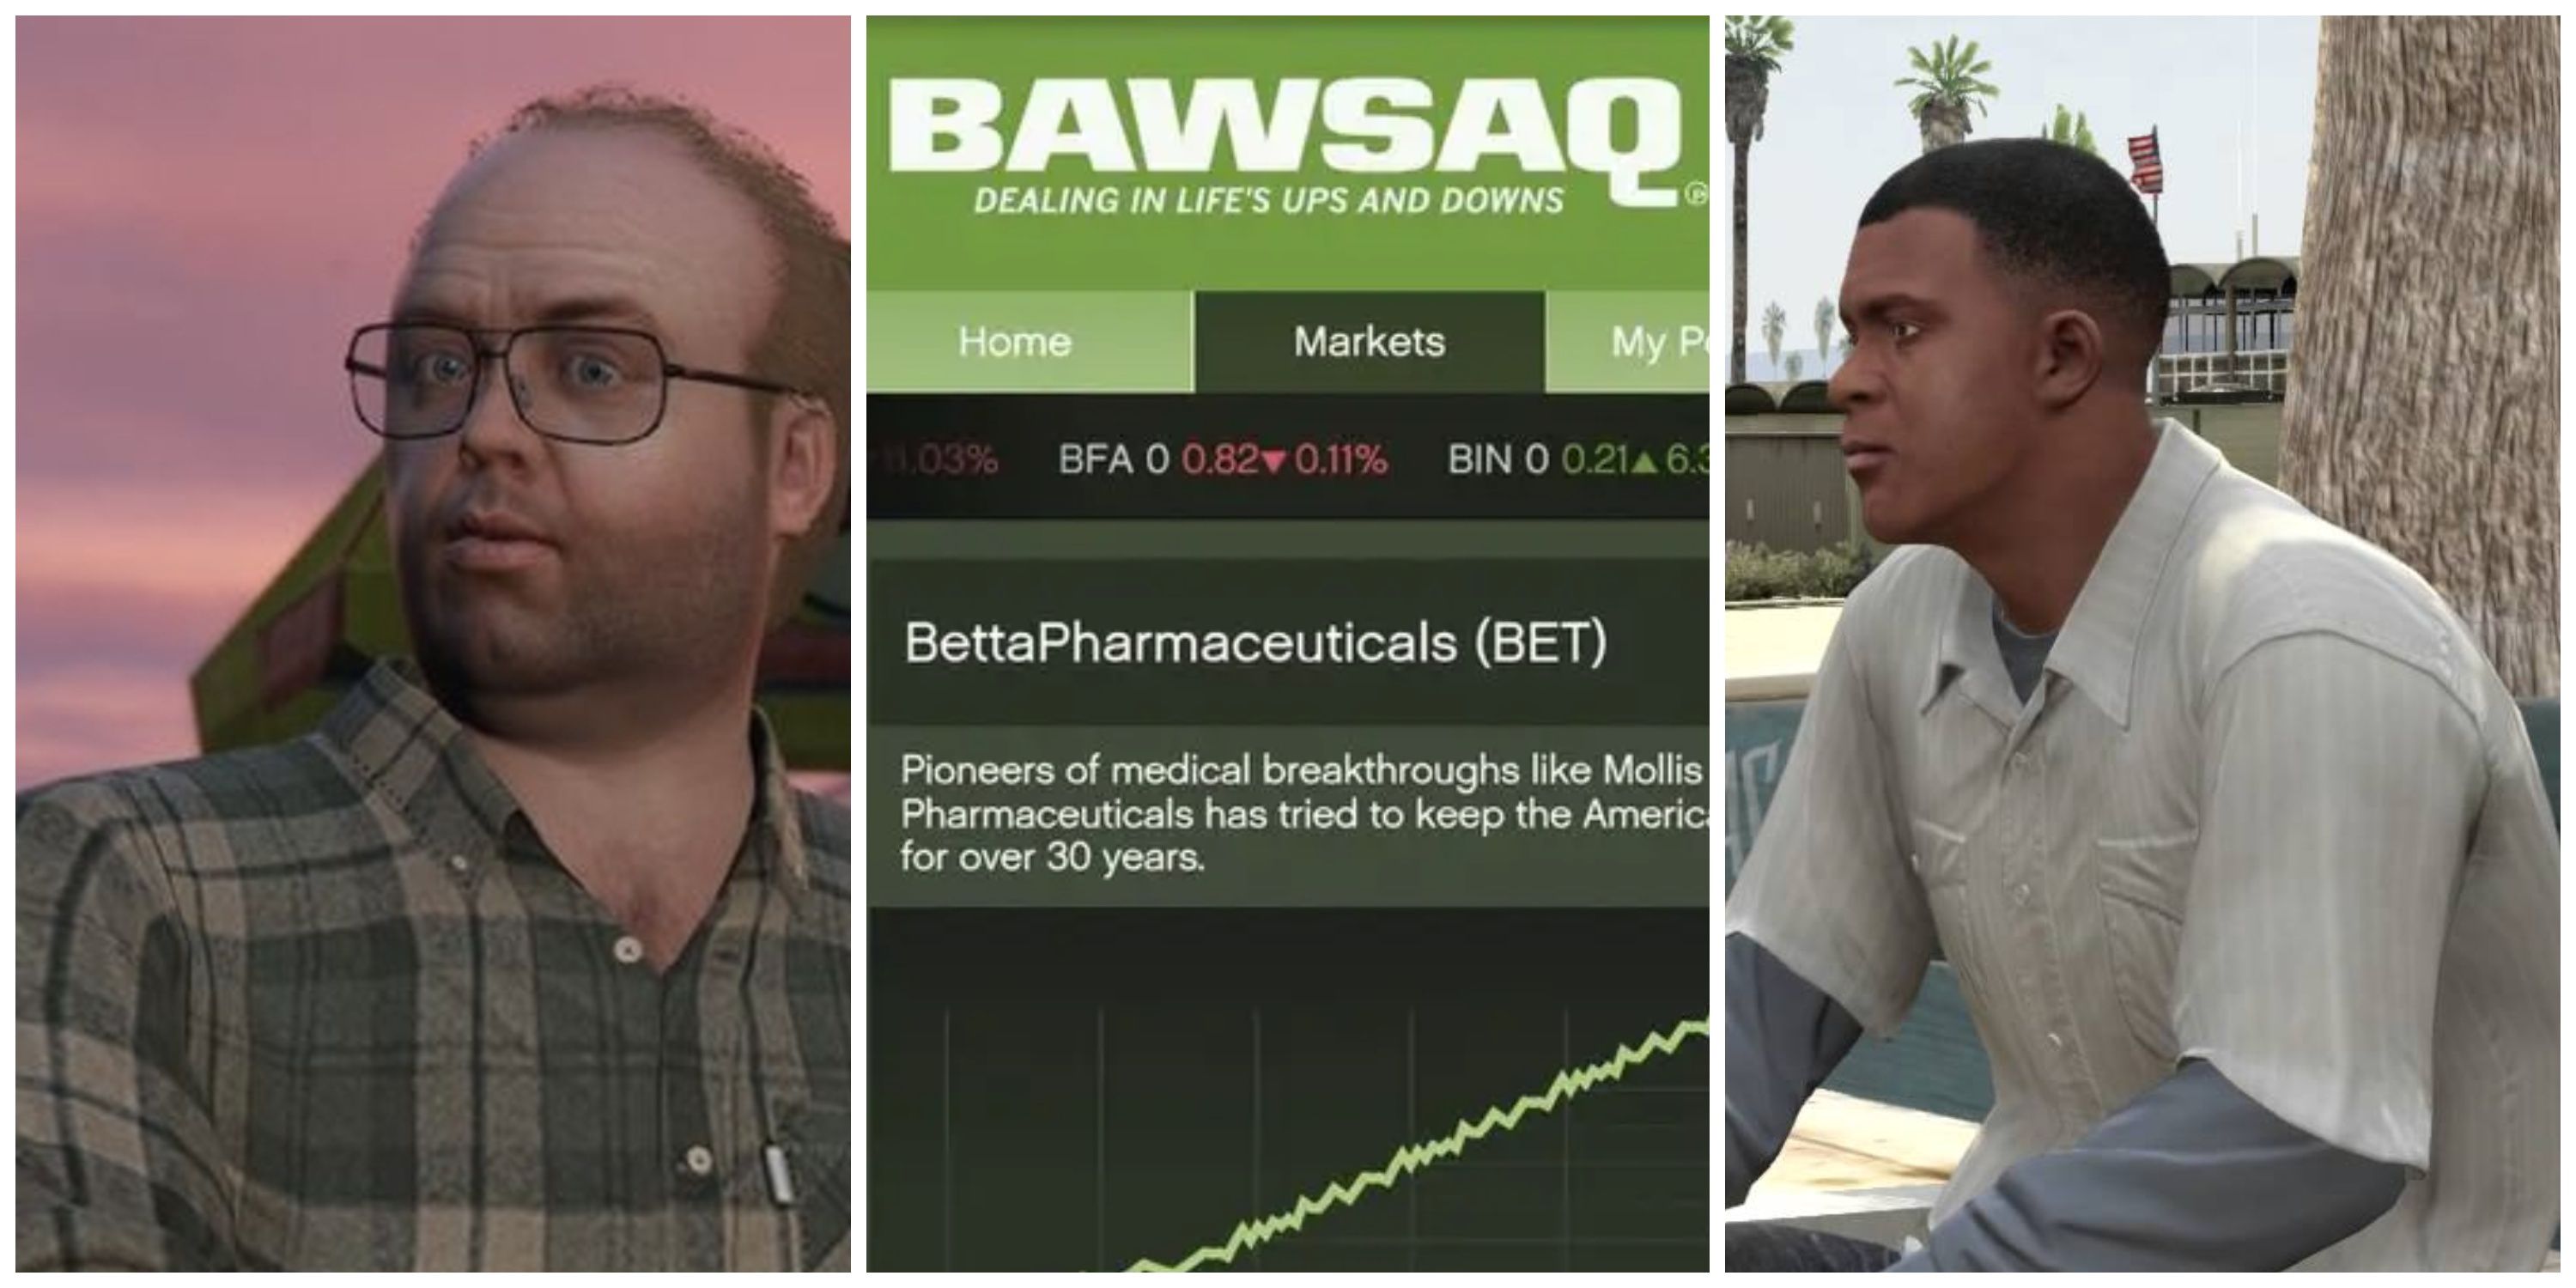 GTA 5 Stock market investment guide and Lester assassinations